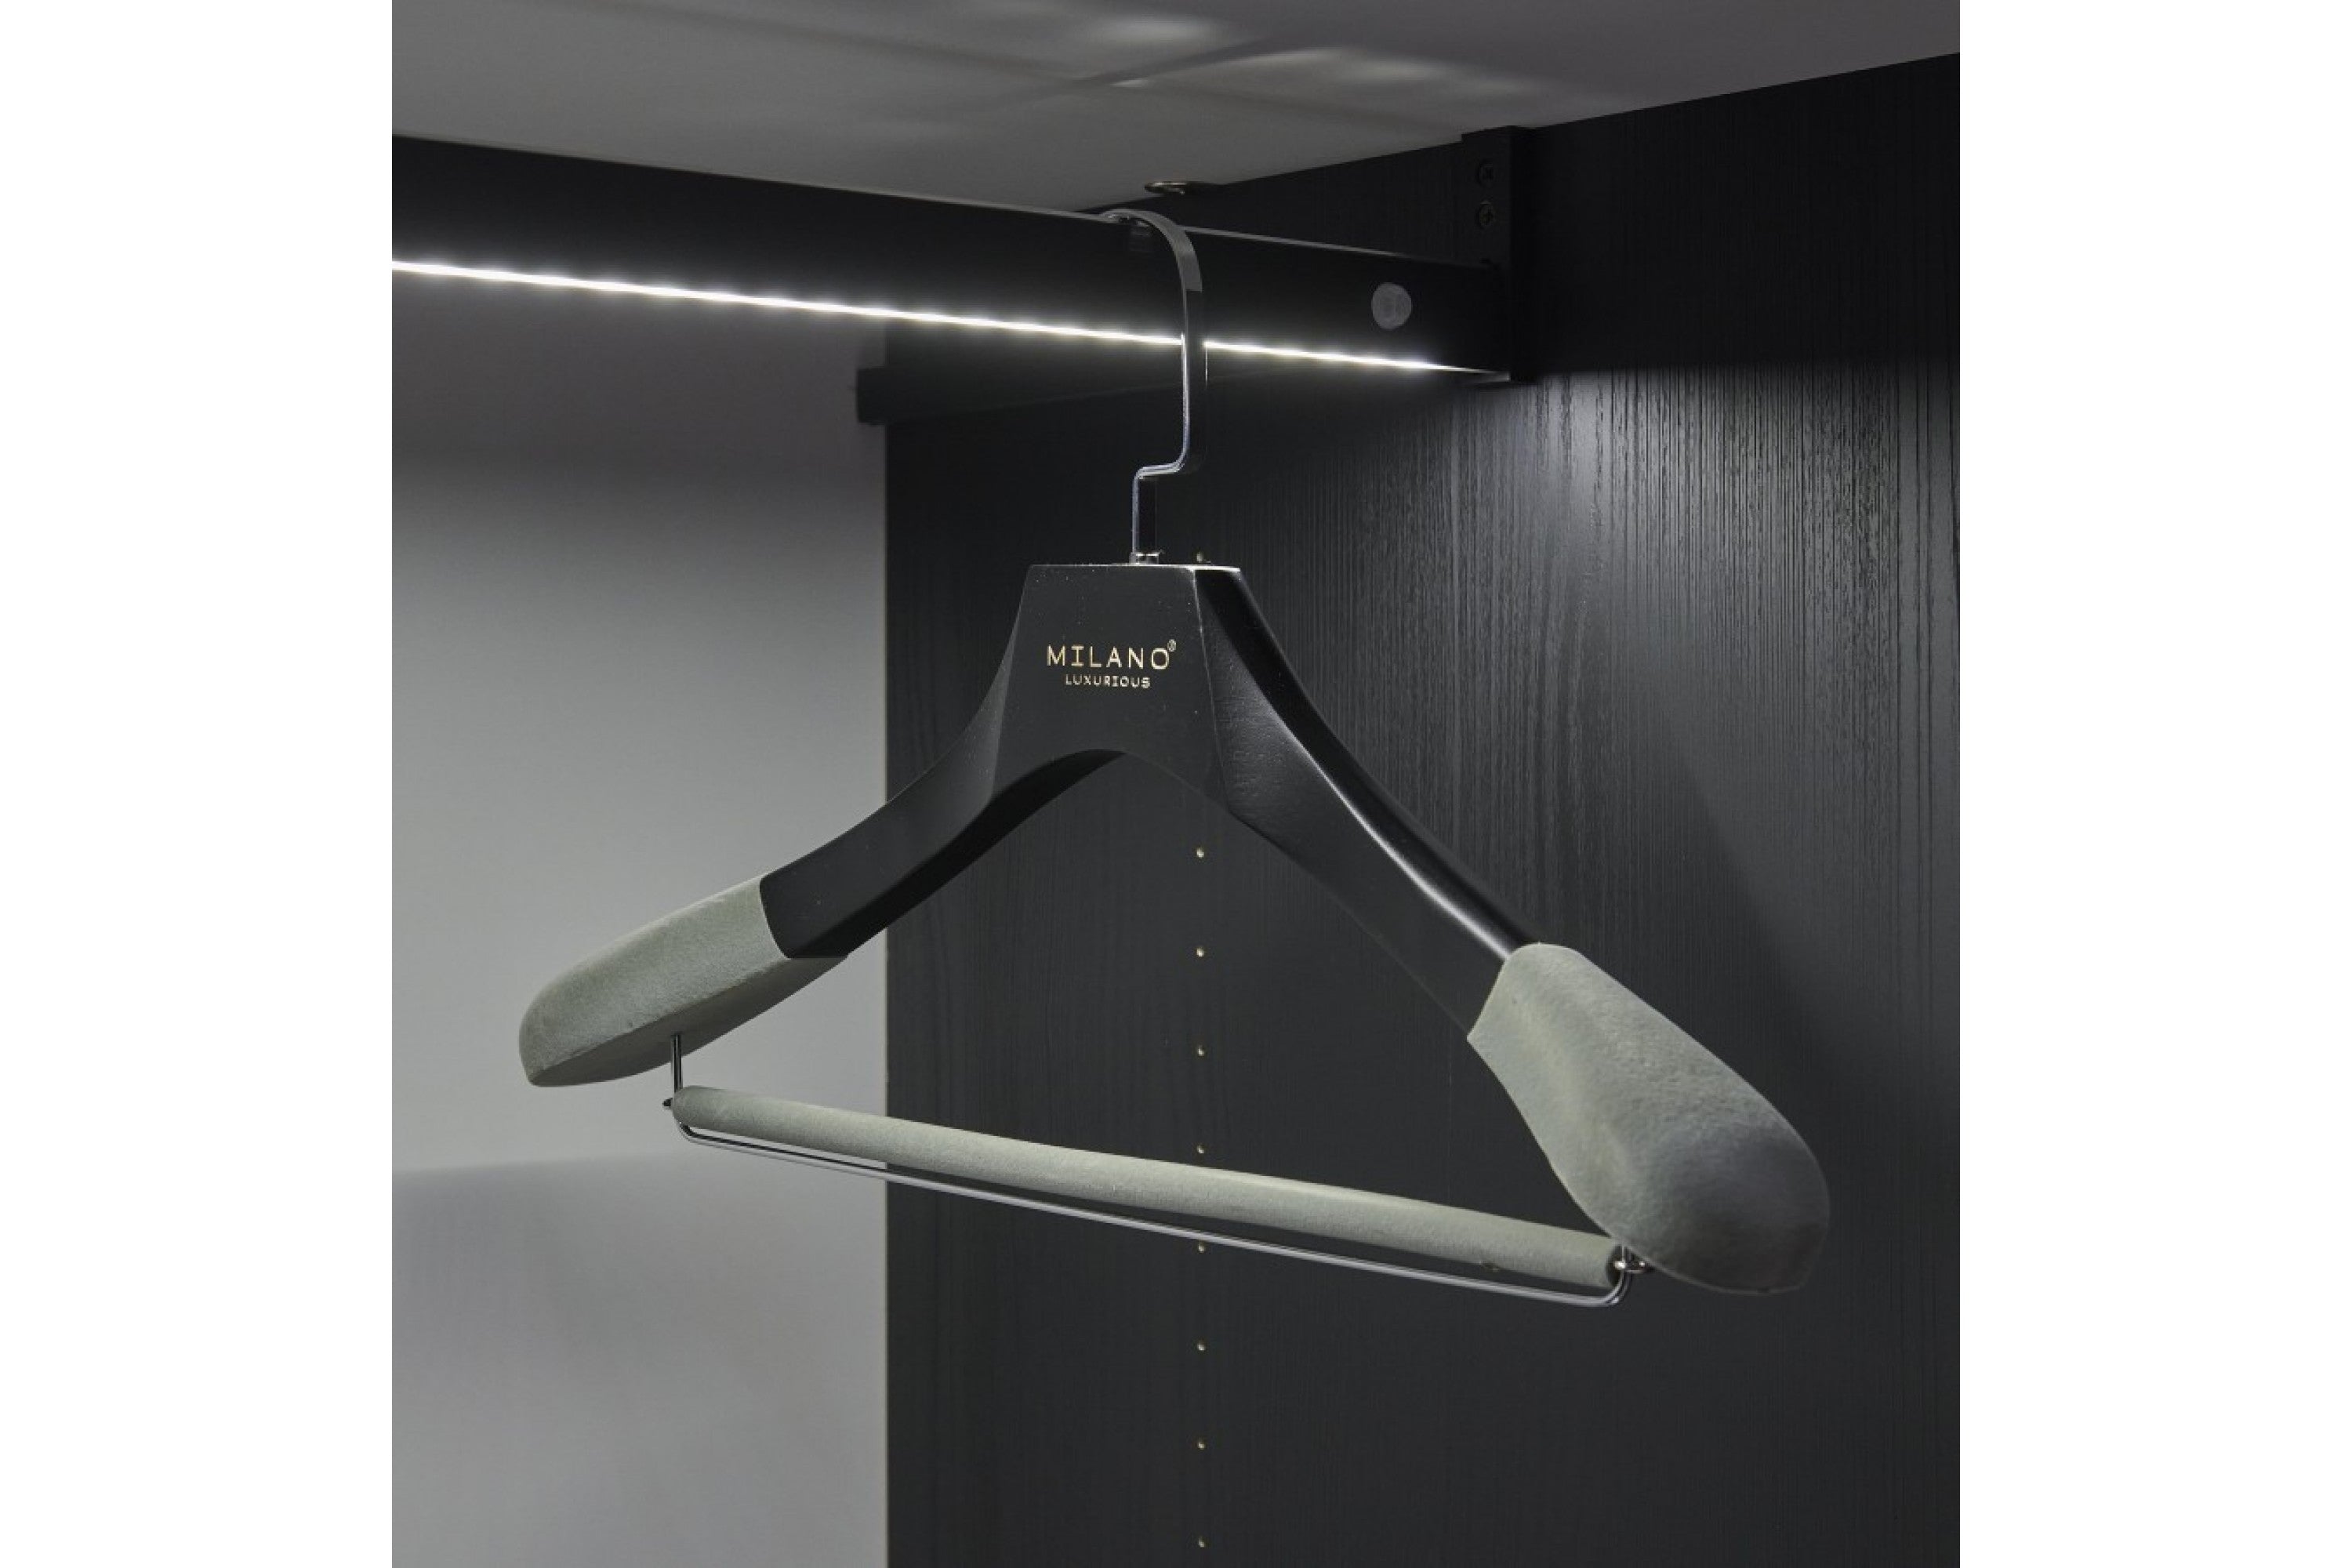 Milano Luxurious Chic gray velvet clothes hanger with trouser bar and black hook